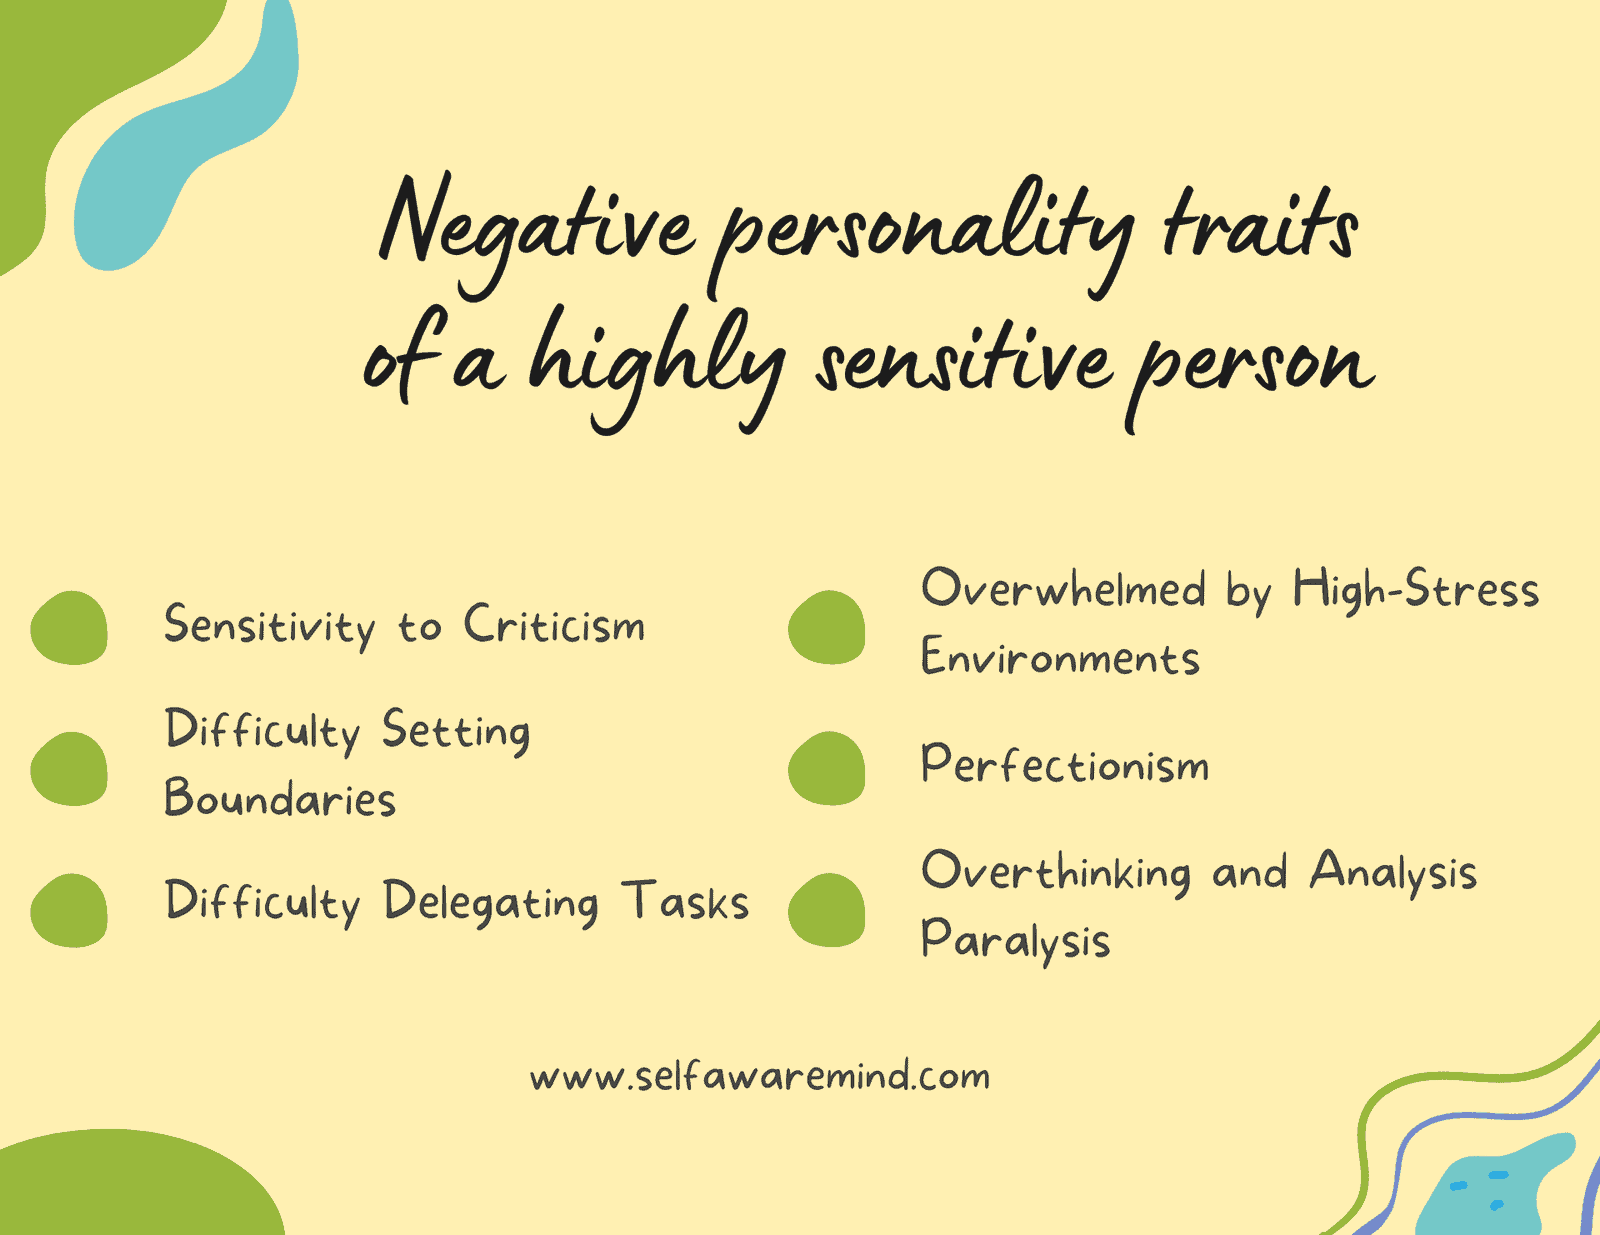 Negative personality traits of a Highly Sensitive Person